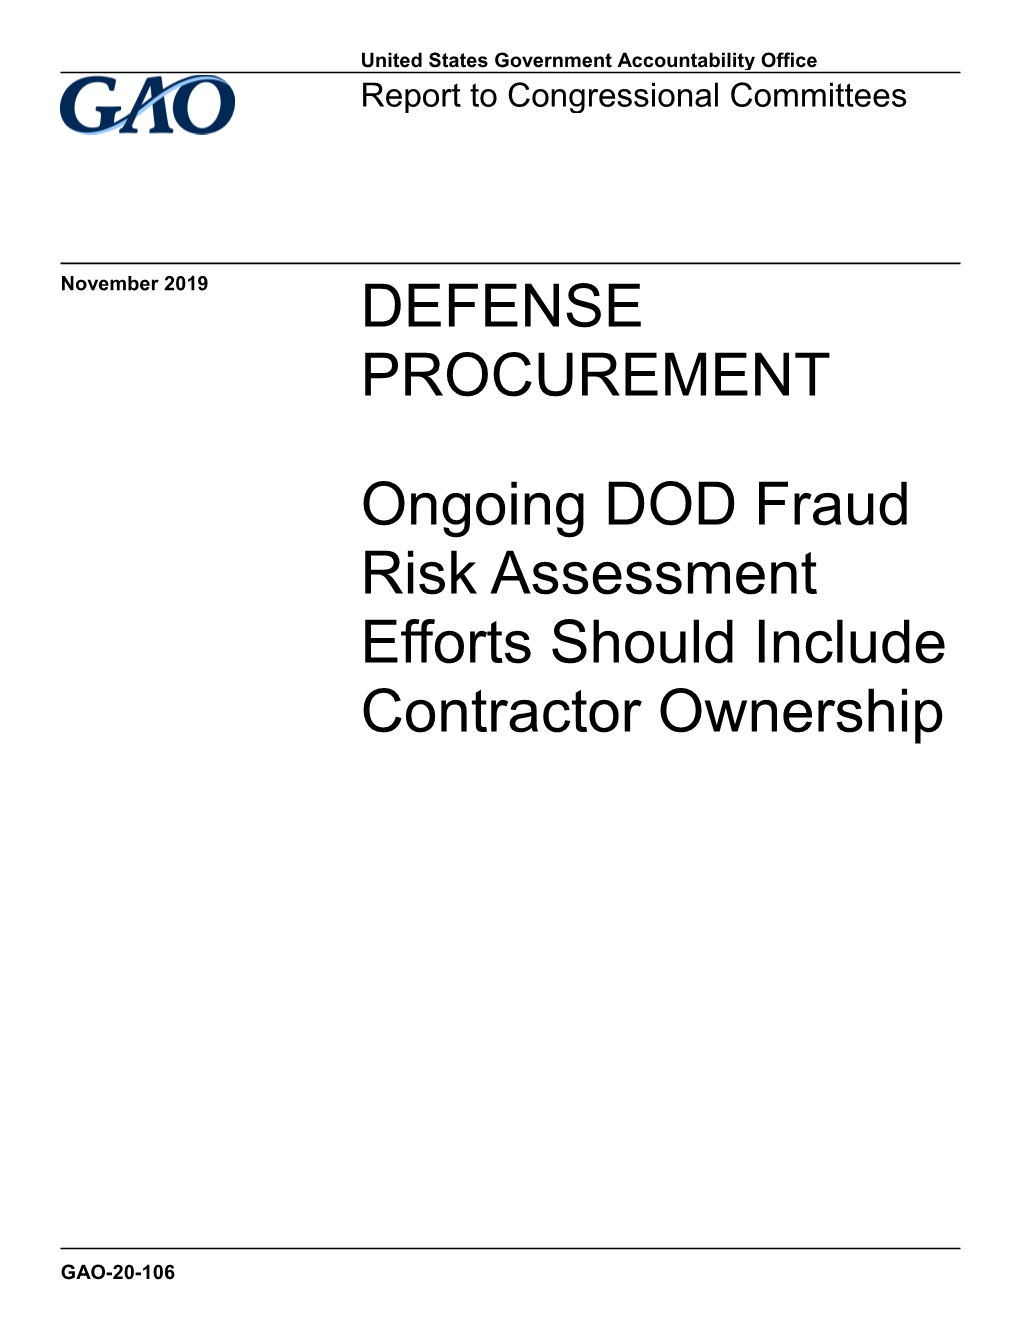 GAO-20-106, DEFENSE PROCUREMENT: Ongoing DOD Fraud Risk Assessment Efforts Should Include Contractor Ownership